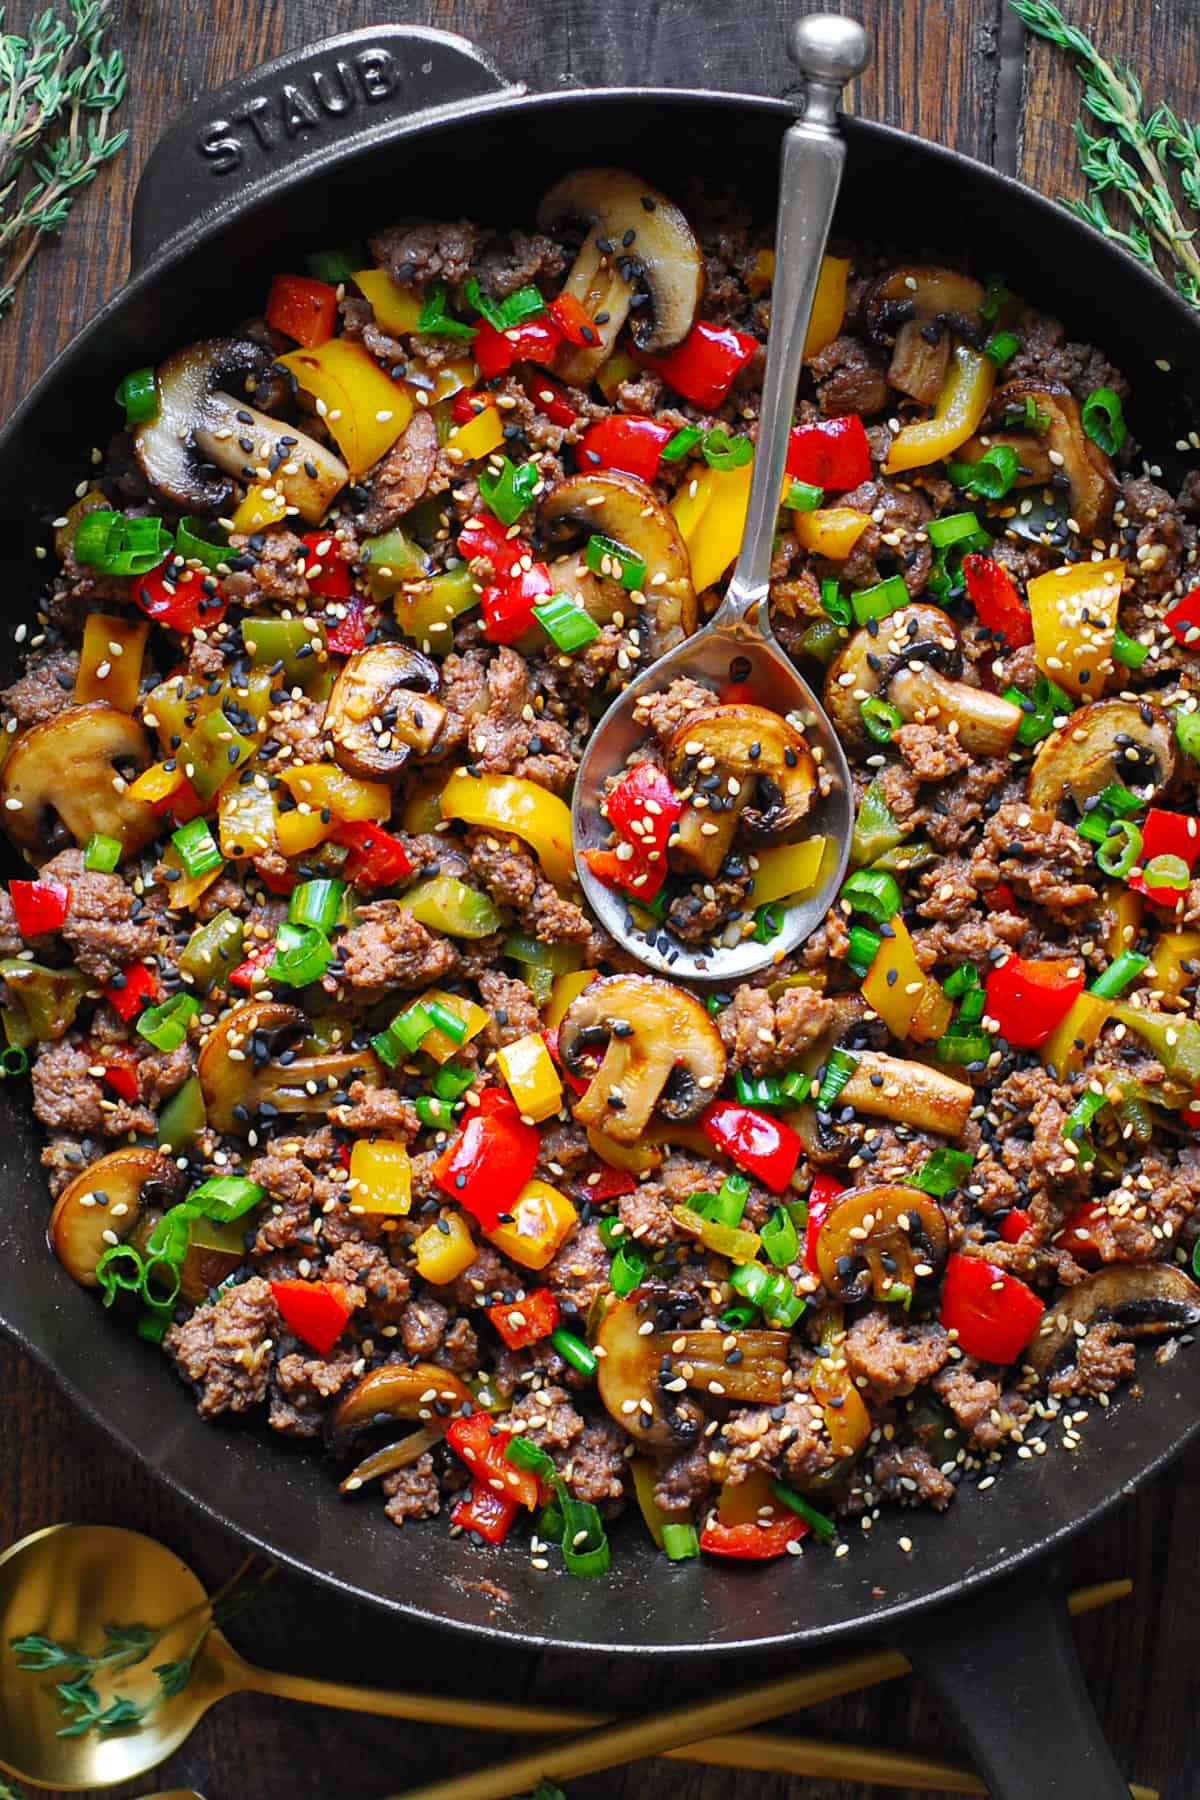 Ground Beef Stir Fry with Bell Peppers, Mushrooms in a cast-iron pan.